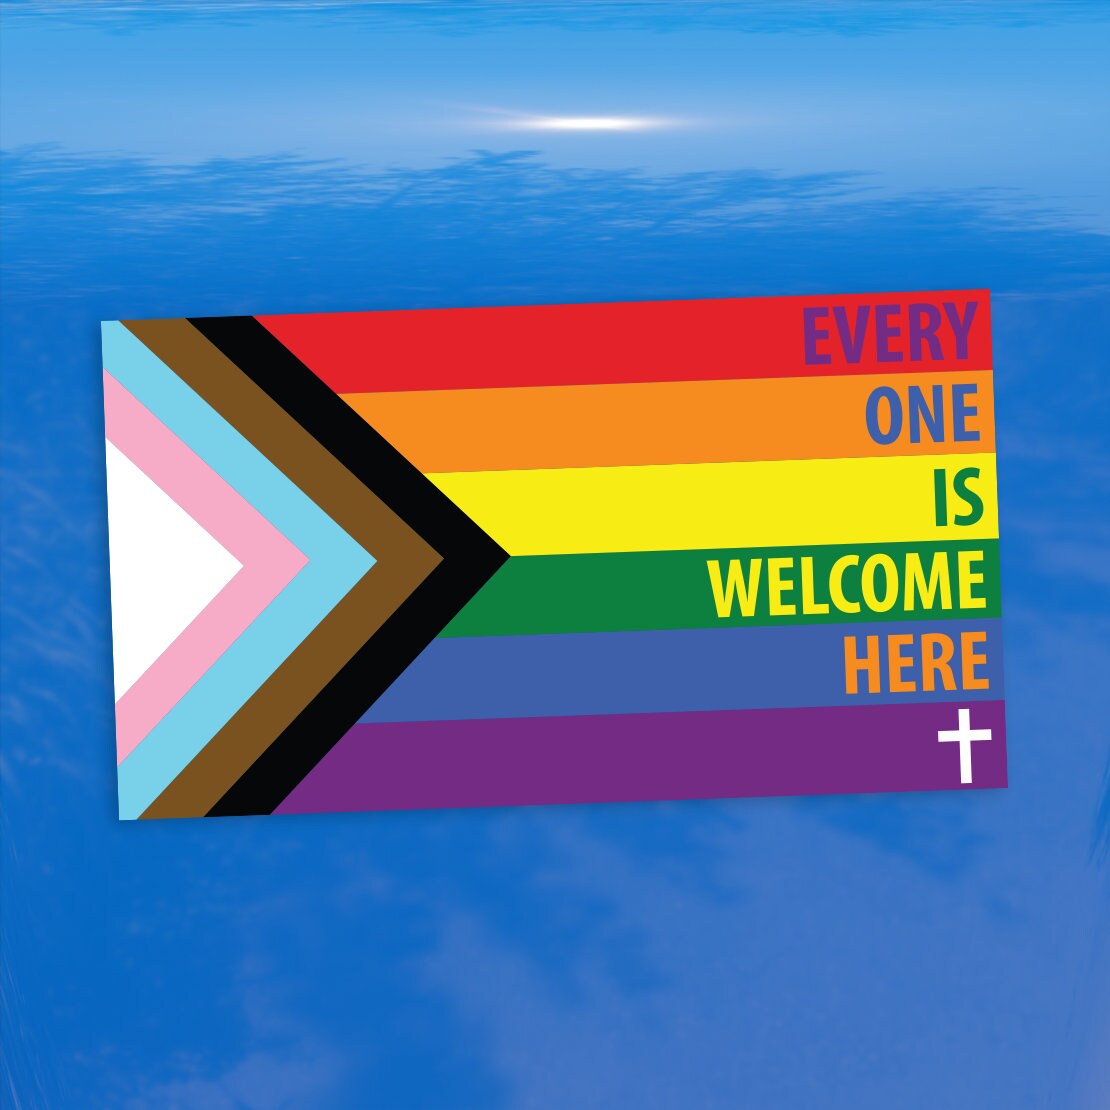 Christian Cross Every One is Welcome Here Progress Pride Flag Vibrant Color  Vinyl Decal Sticker 